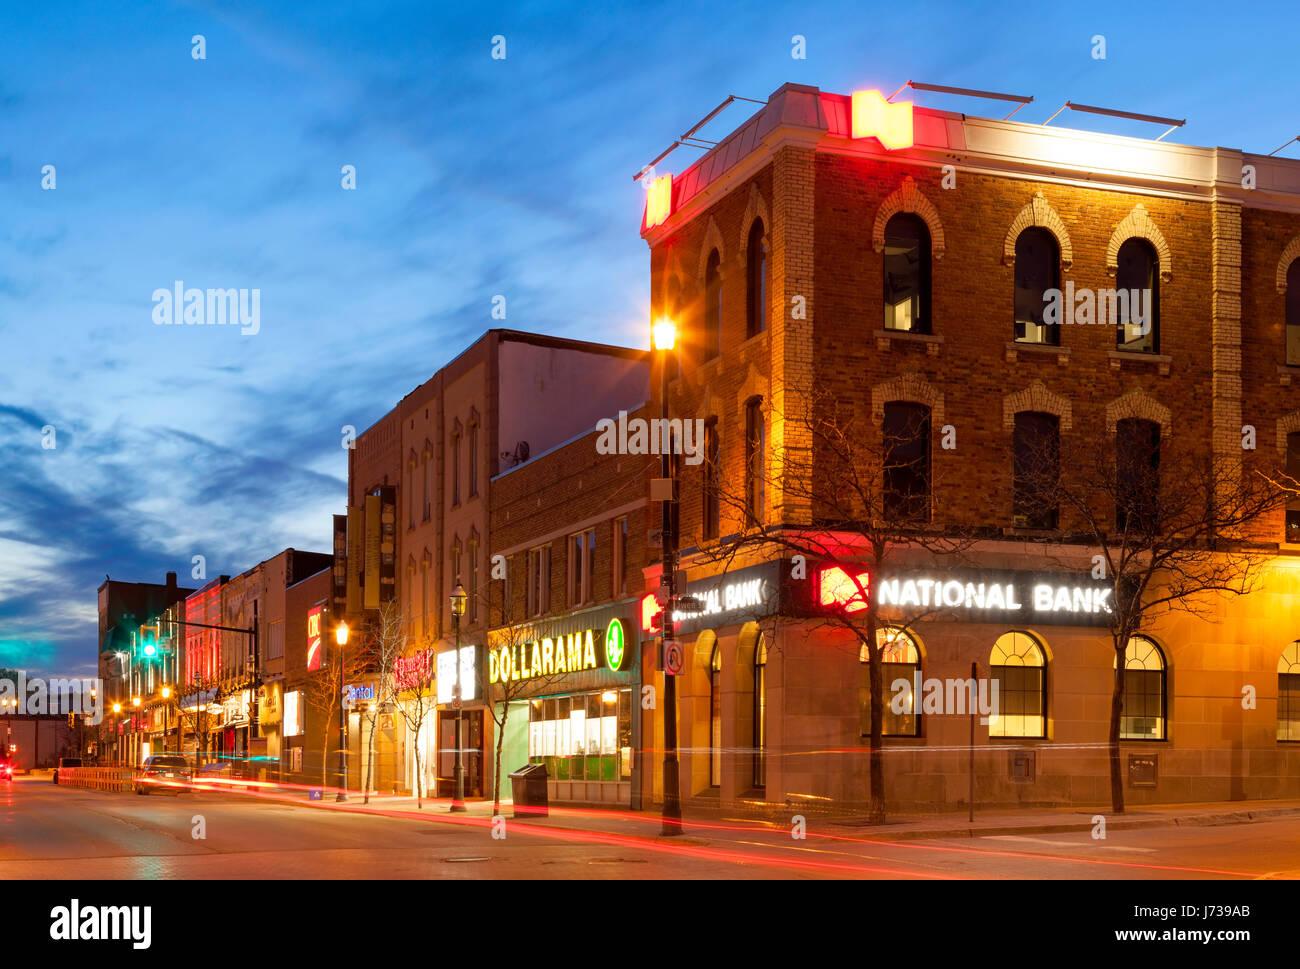 Downtown Barrie in the spring along Dunlop Street East at dusk. Barrie Ontario, Canada. Stock Photo